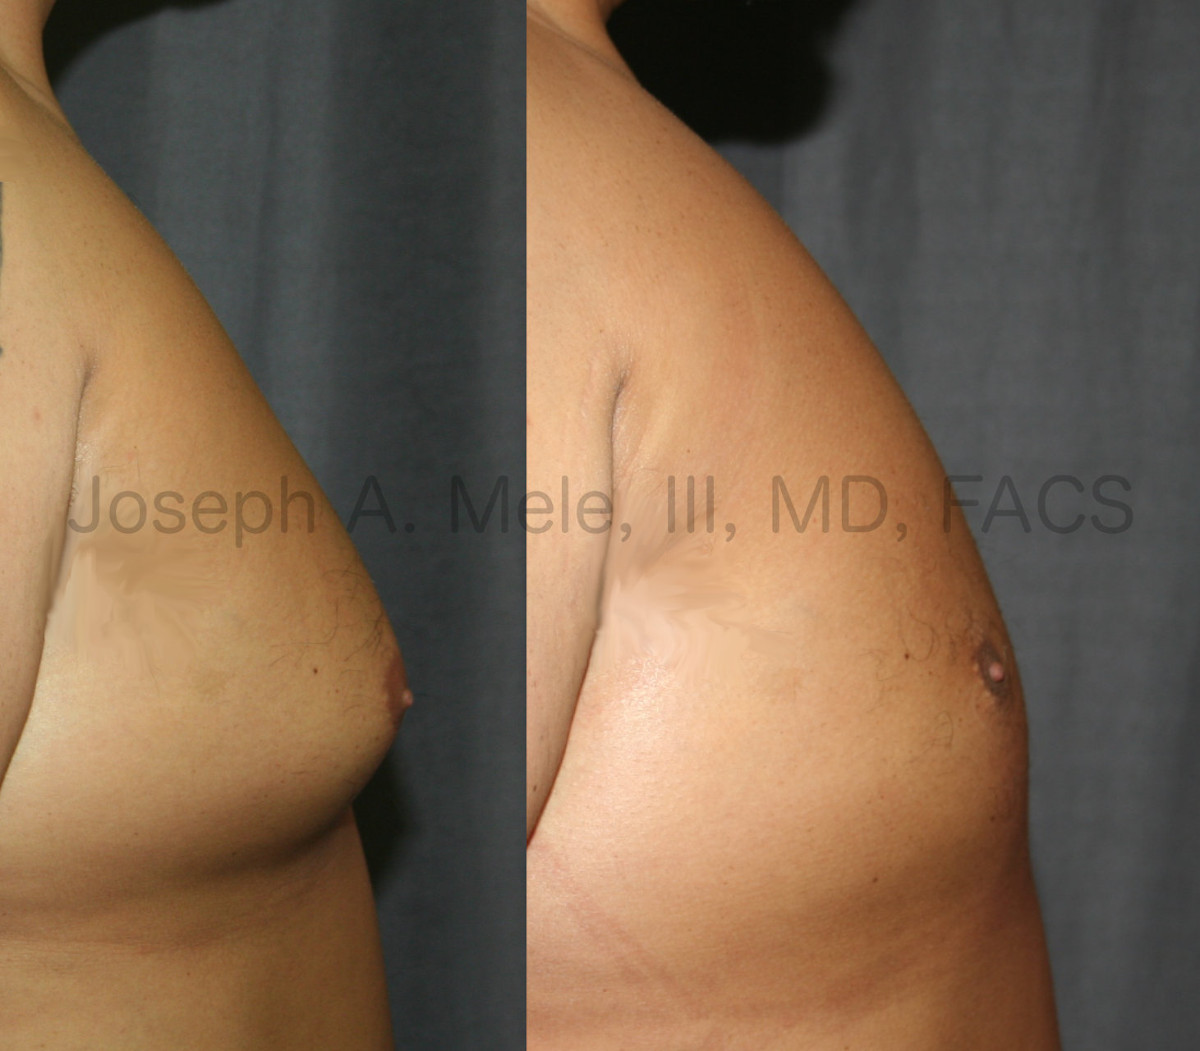 Male Breast Reduction Before and After Pictures - Gynecomastia Before and After Photos